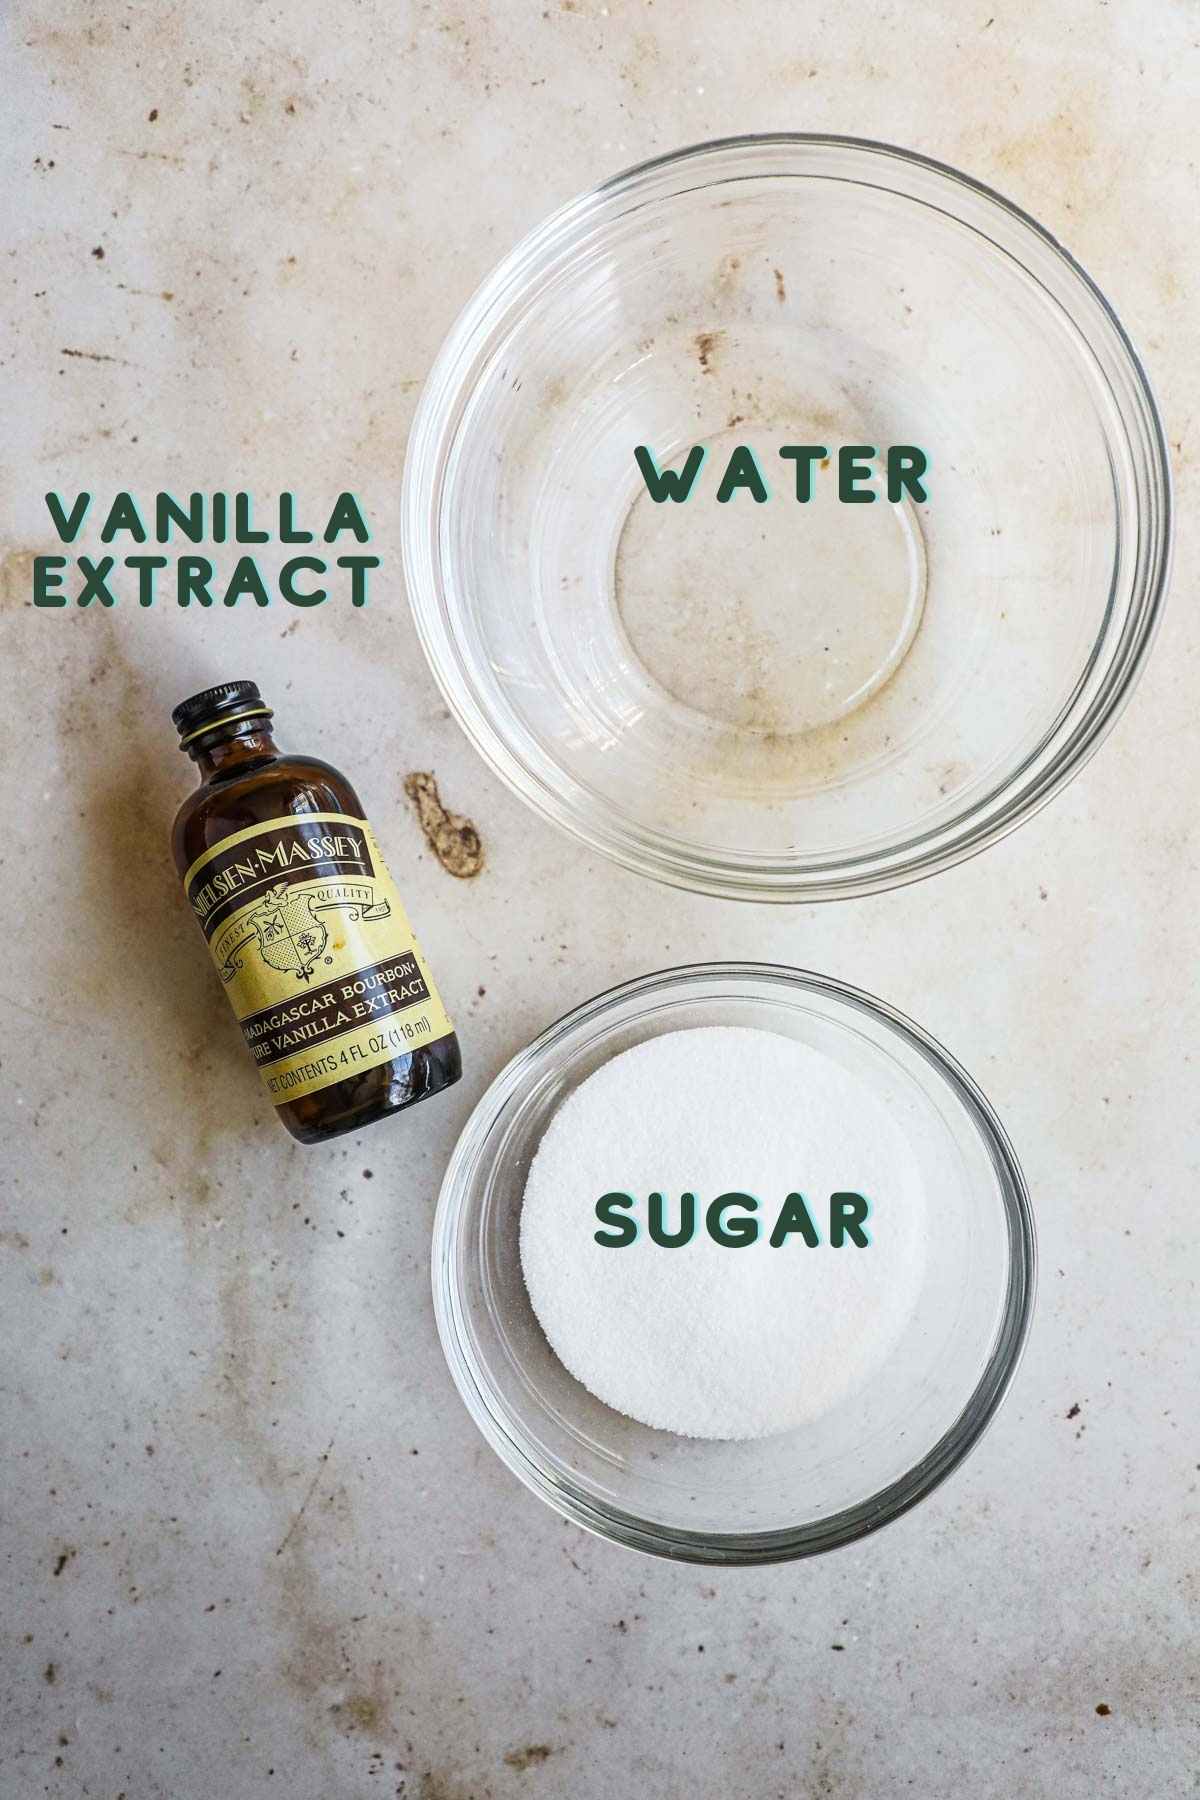 Ingredients to make homemade caramel syrup for coffee.